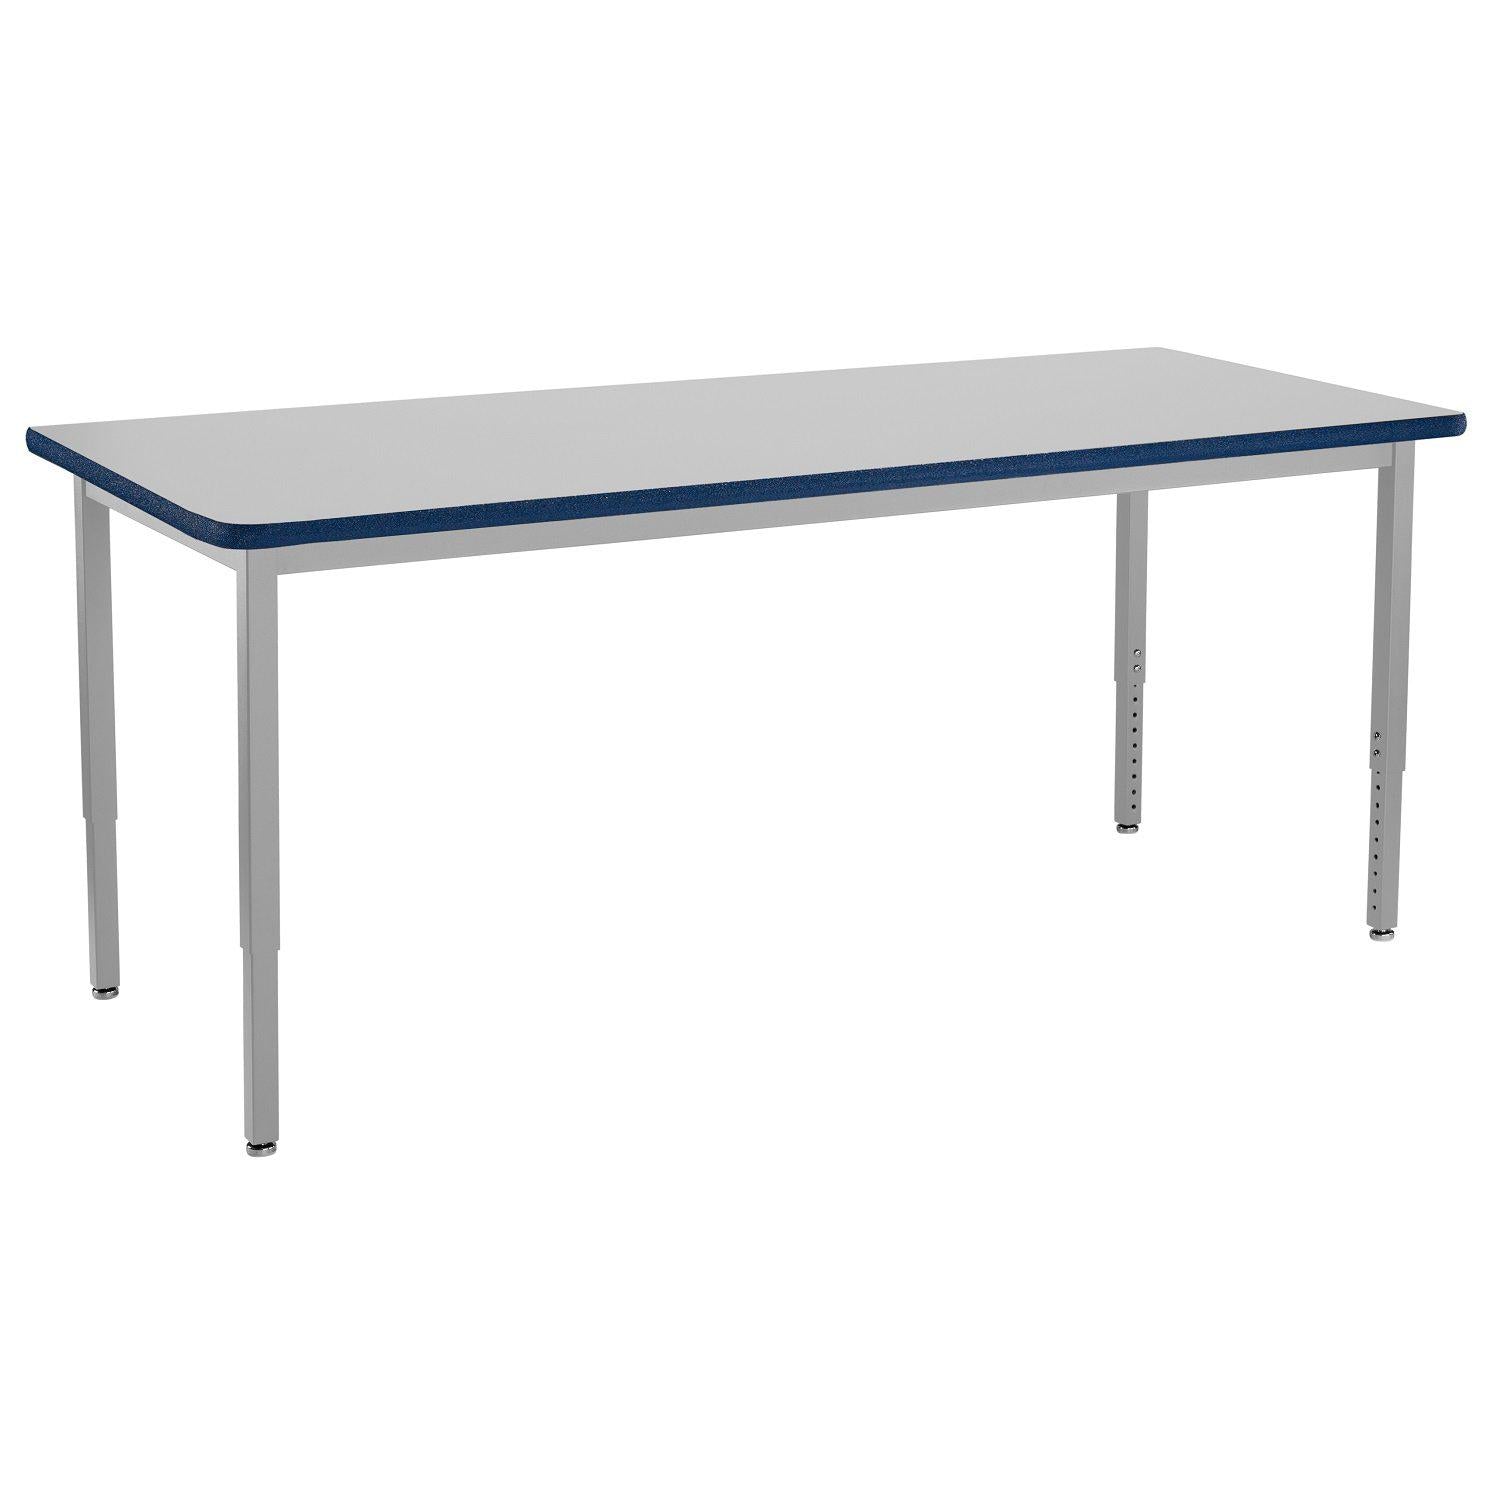 Heavy-Duty Height-Adjustable Utility Table, Soft Grey Frame, 24" x 72", Supreme High-Pressure Laminate Top with Black ProtectEdge